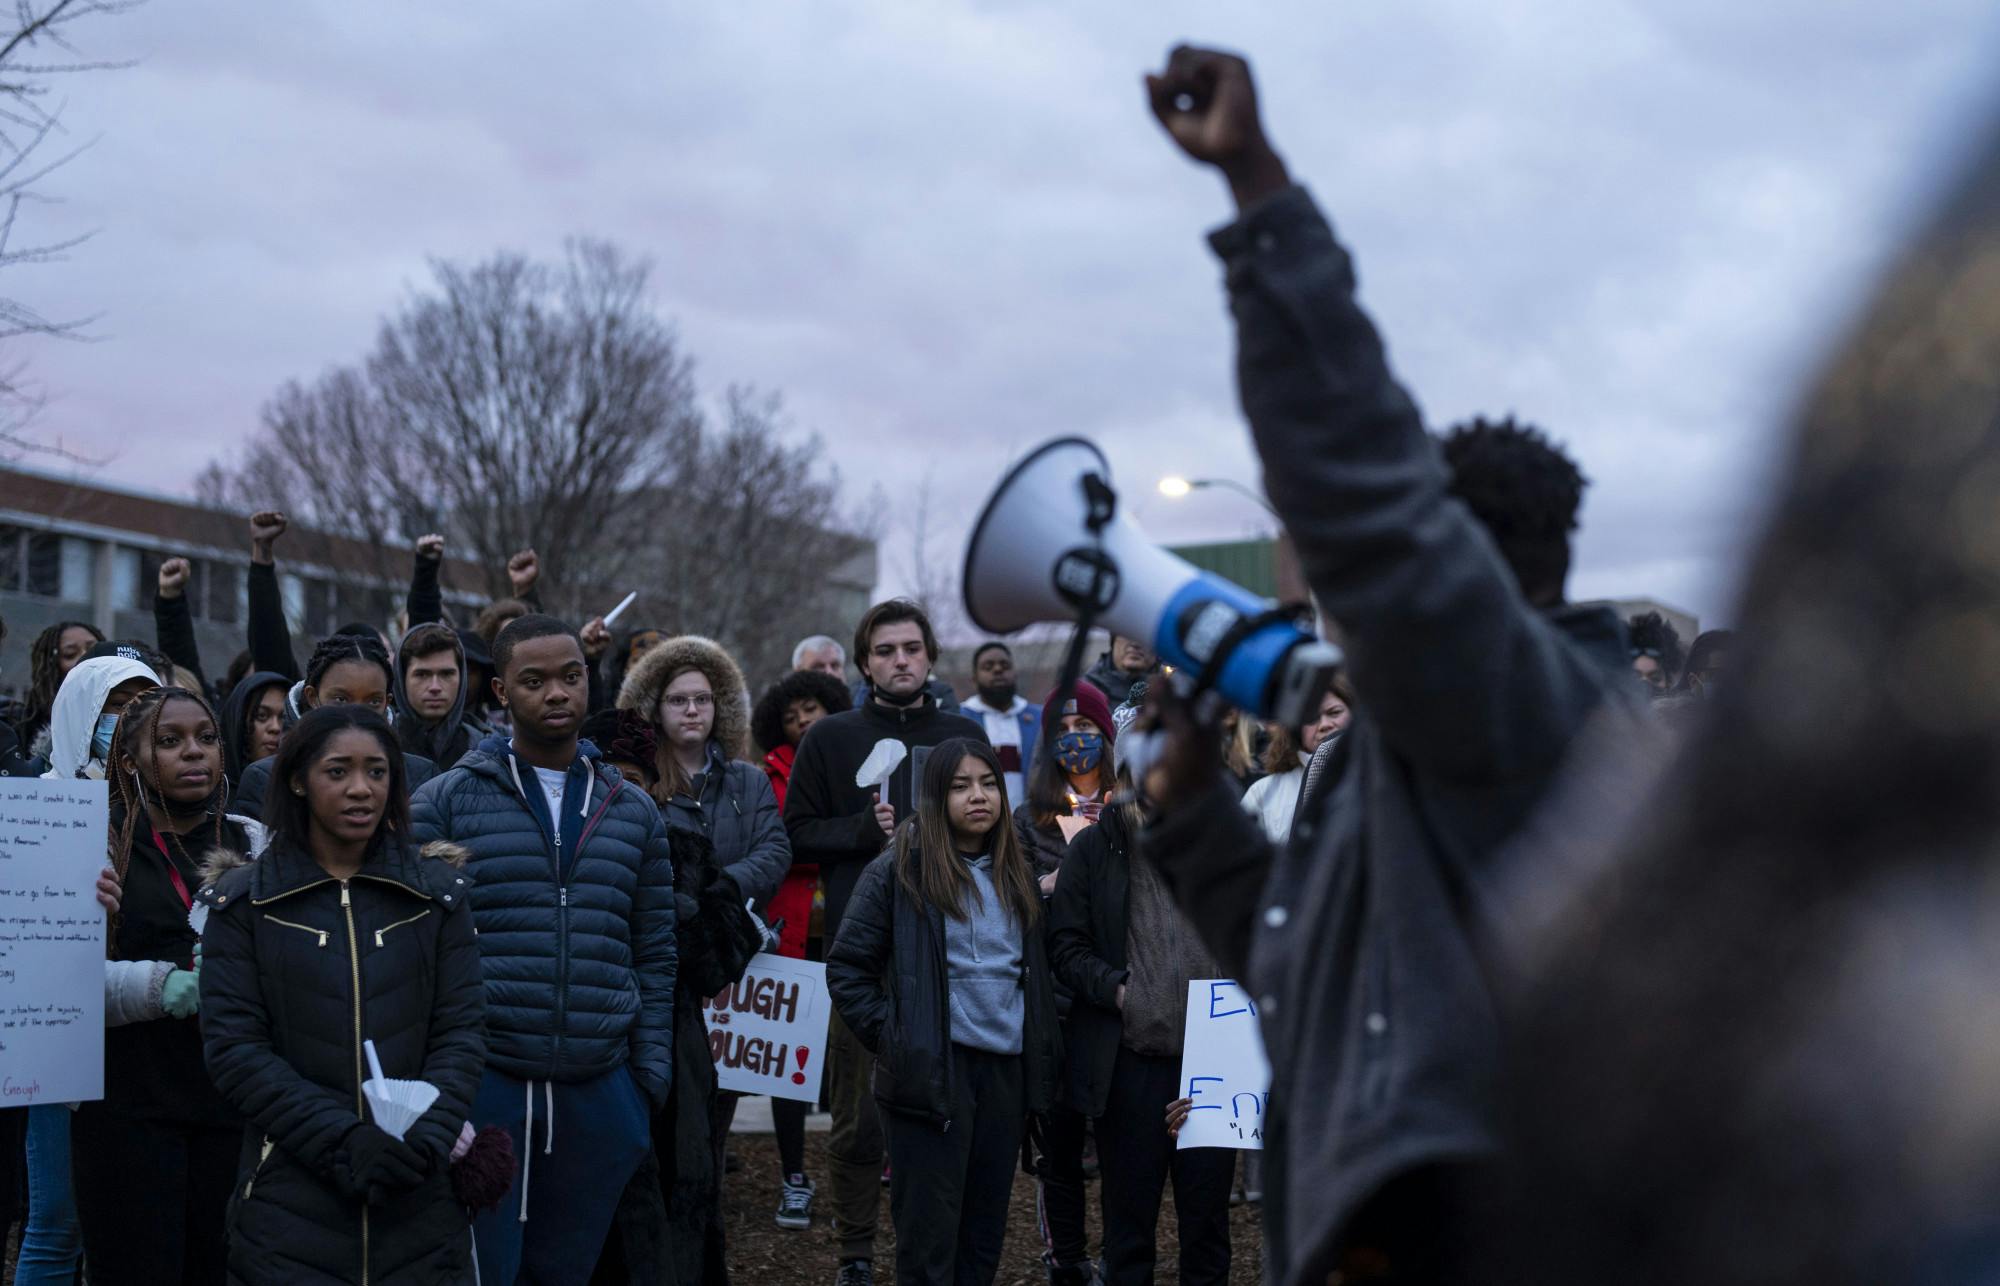 <p>Students and community members gathered at the Rock on Farm Lane in remembrance of Patrick Lyoya. The candlelight vigil was hosted by the Black Student Alliance after Lyoya was killed by Grand Rapids police during a traffic stop on Monday, April 4. - April 19, 2022.</p>